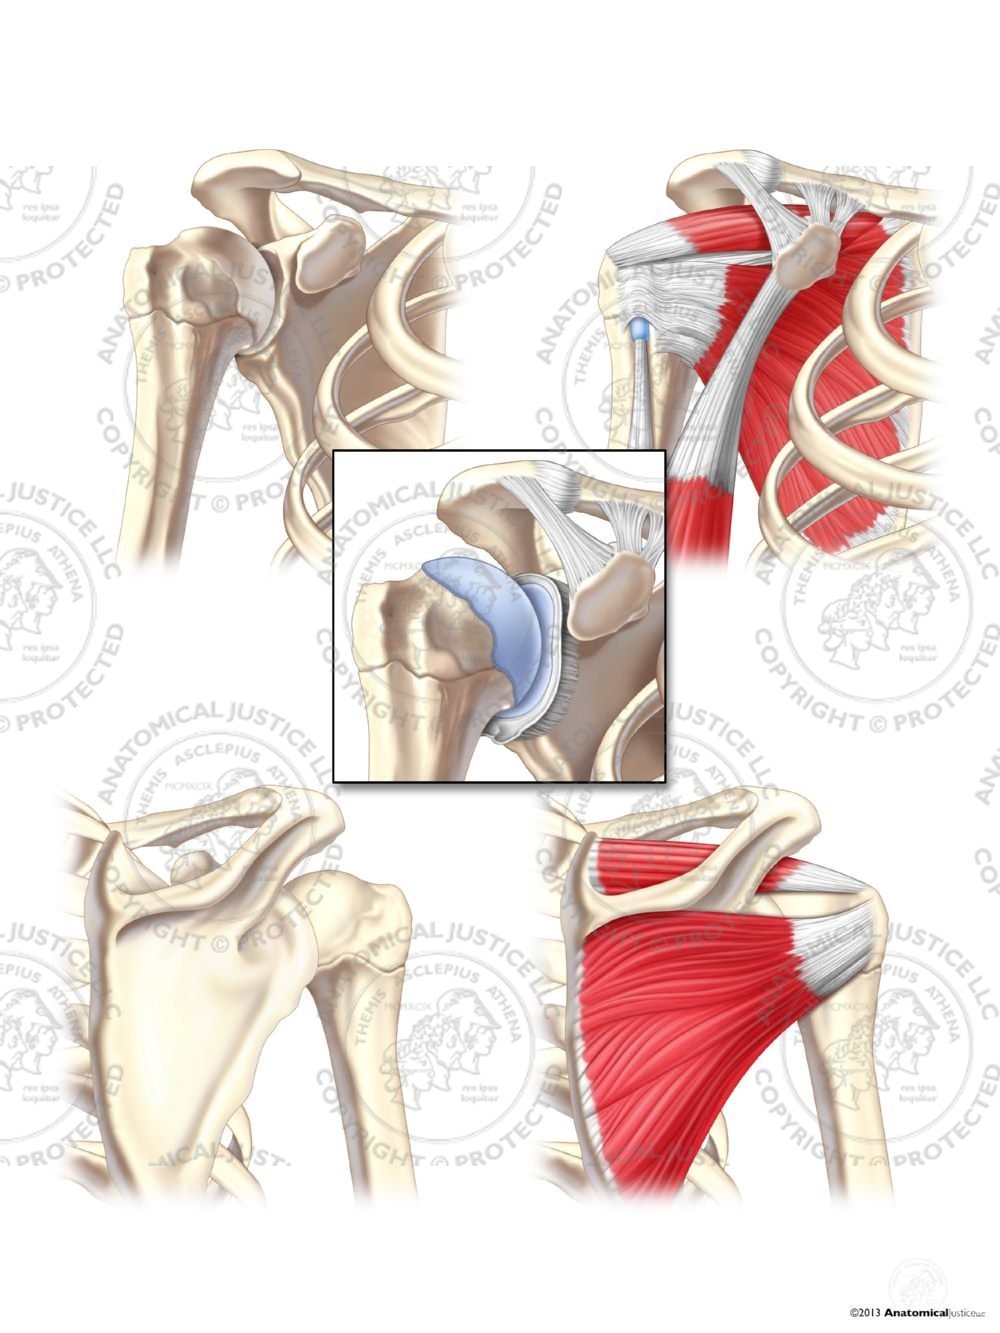 Anterior and Posterior Anatomy of the Right Shoulder – No Text